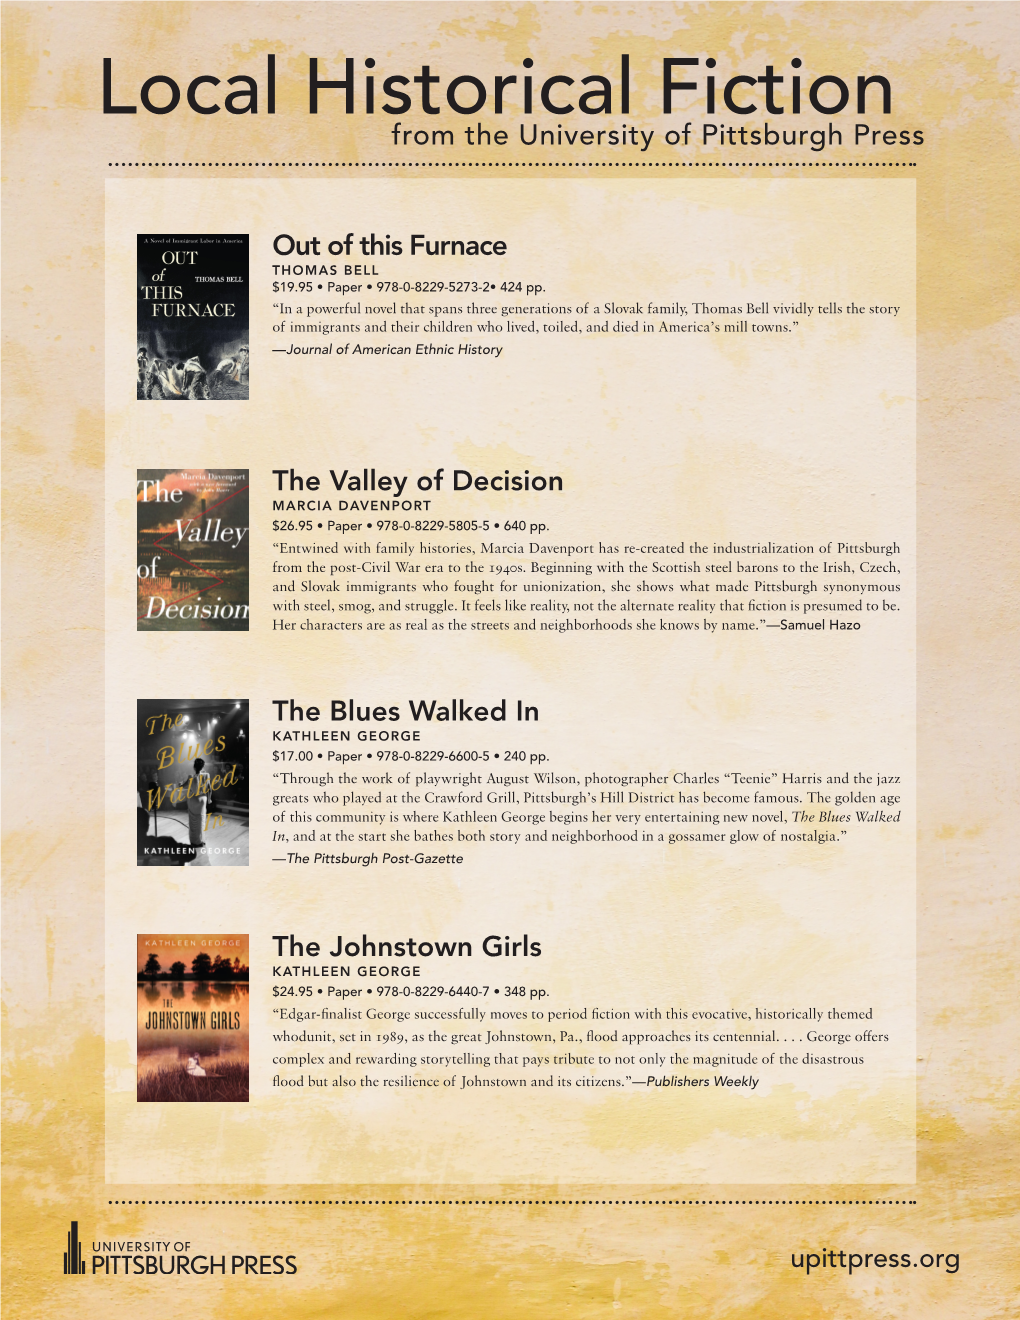 Local Historical Fiction from the University of Pittsburgh Press